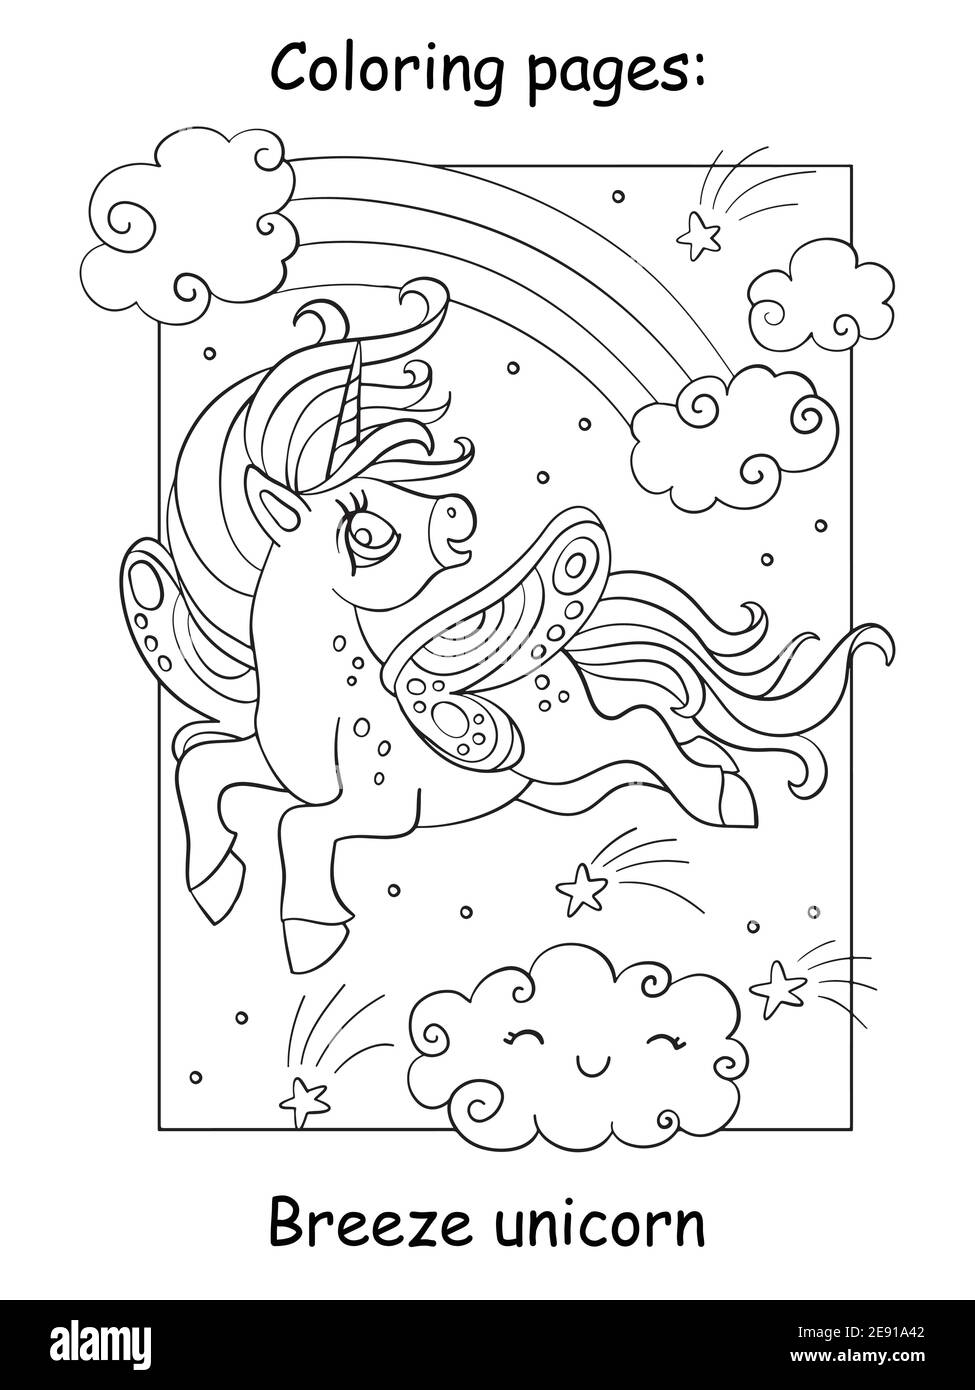 sunbeams coloring pages